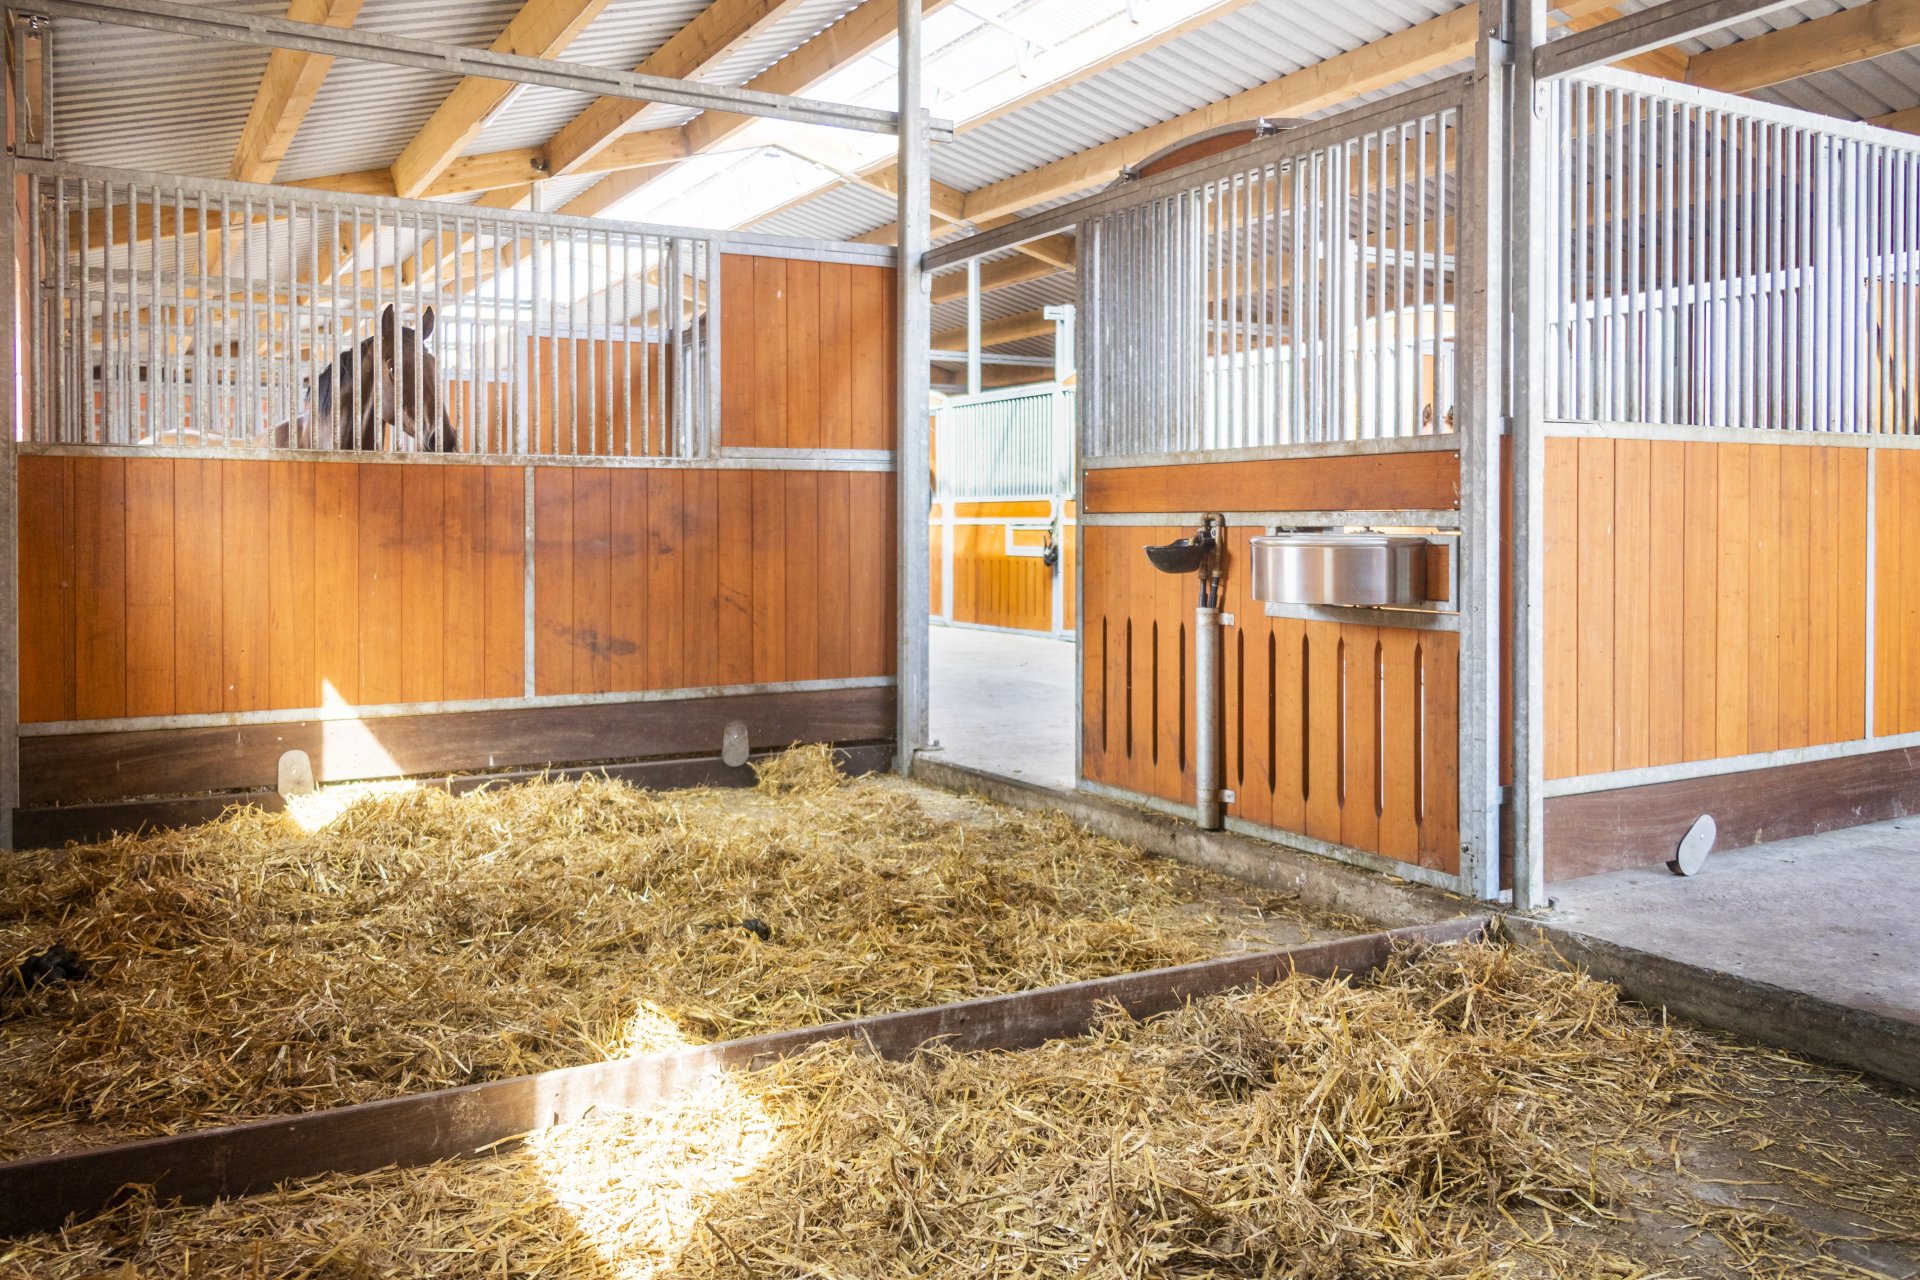 Image horse stall stable partitions (M000115731)